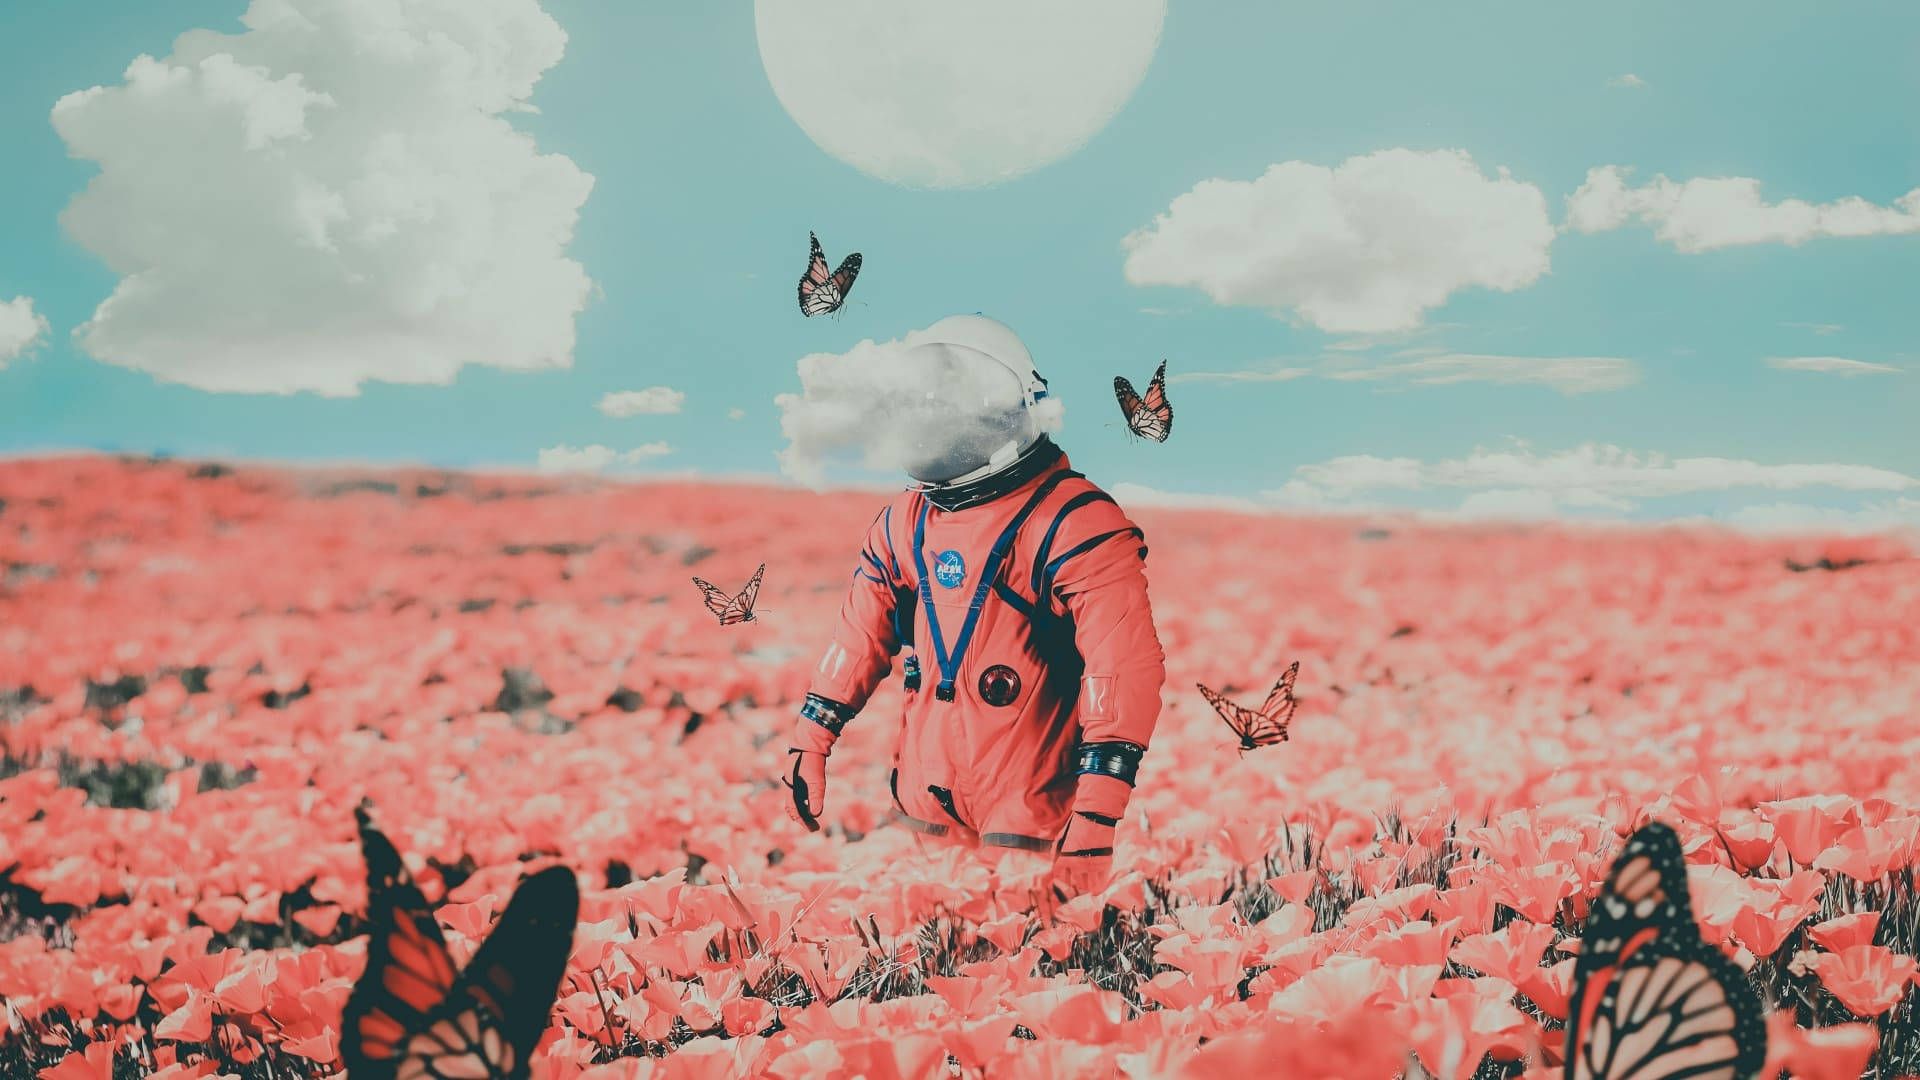 A person in an orange suit standing among flowers - 1920x1080, profile picture